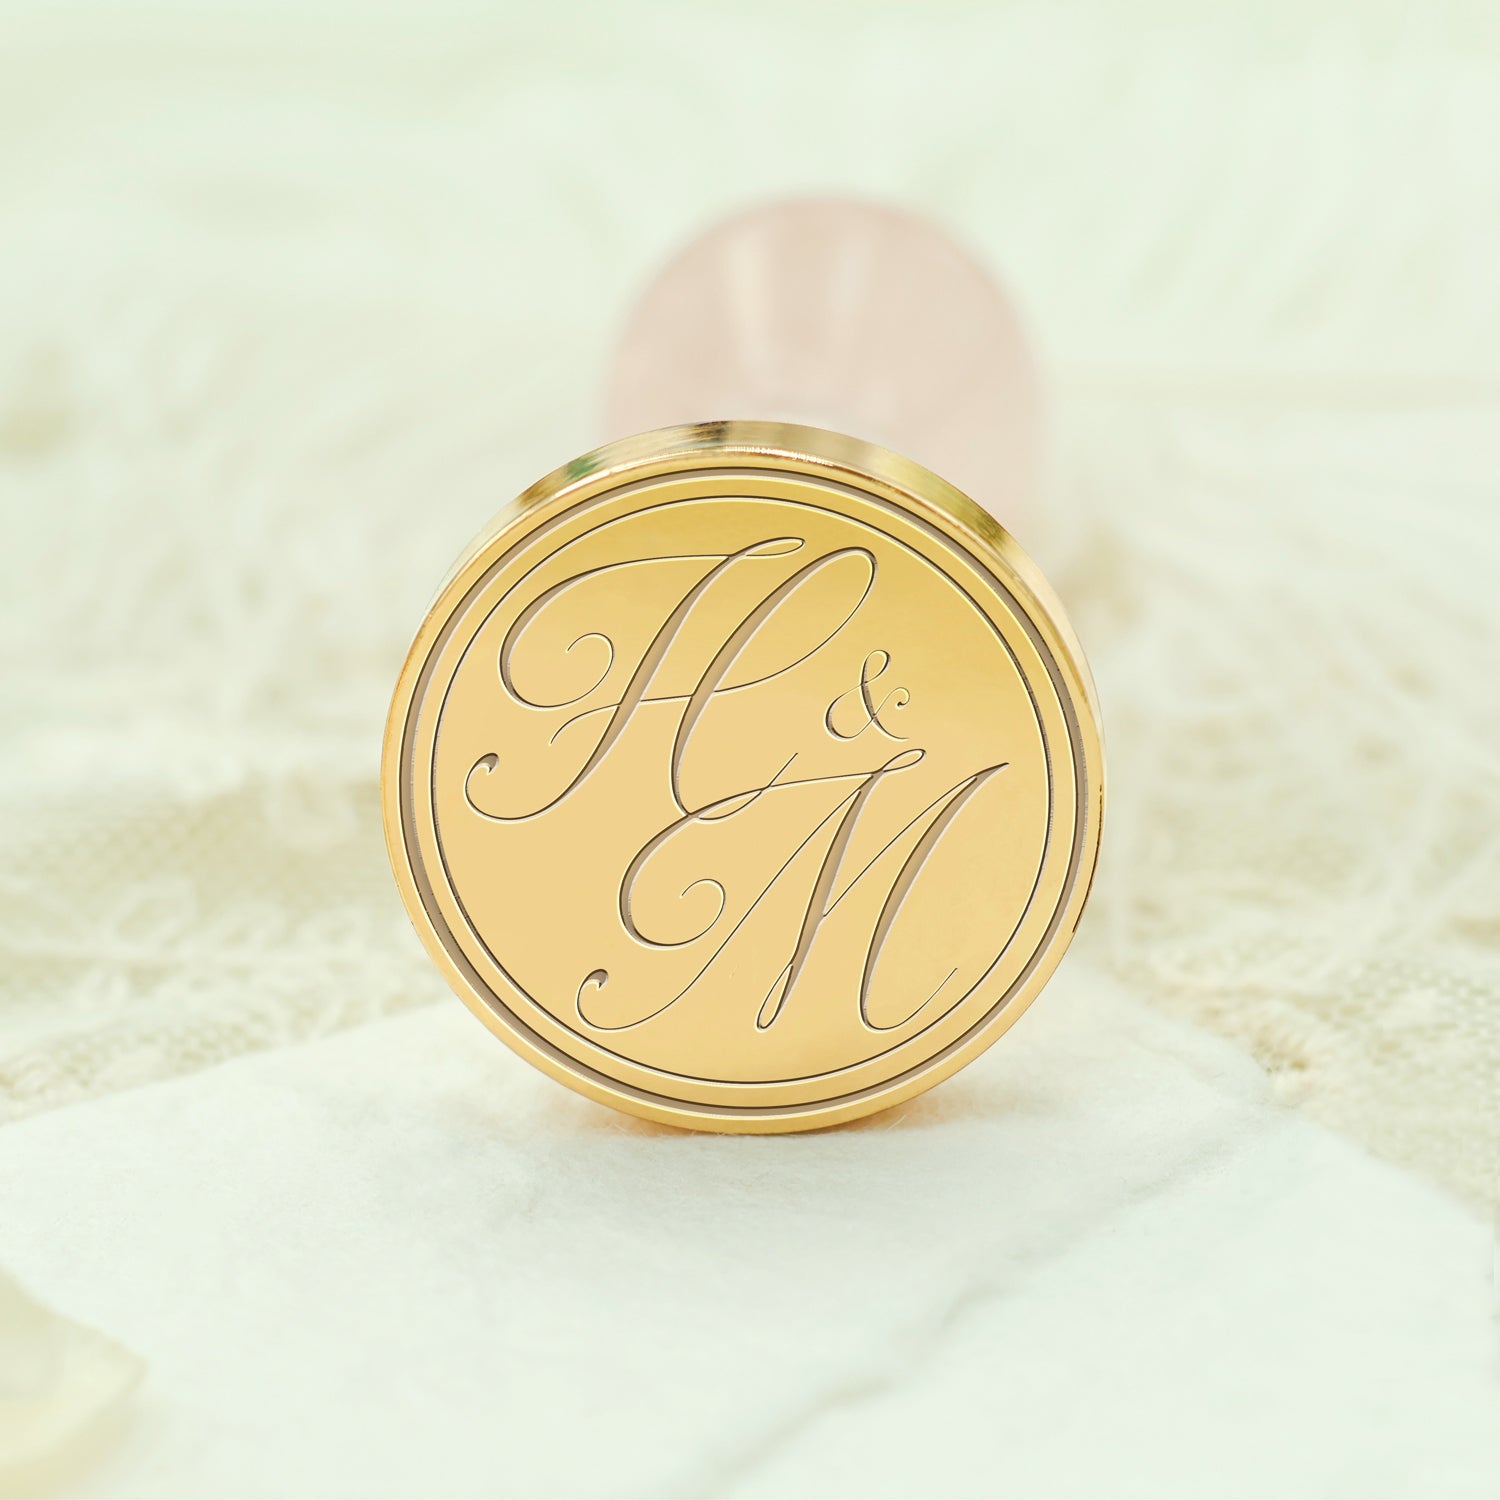 Wedding Custom Wax Seal Stamp with Double Initials / Couple's Names